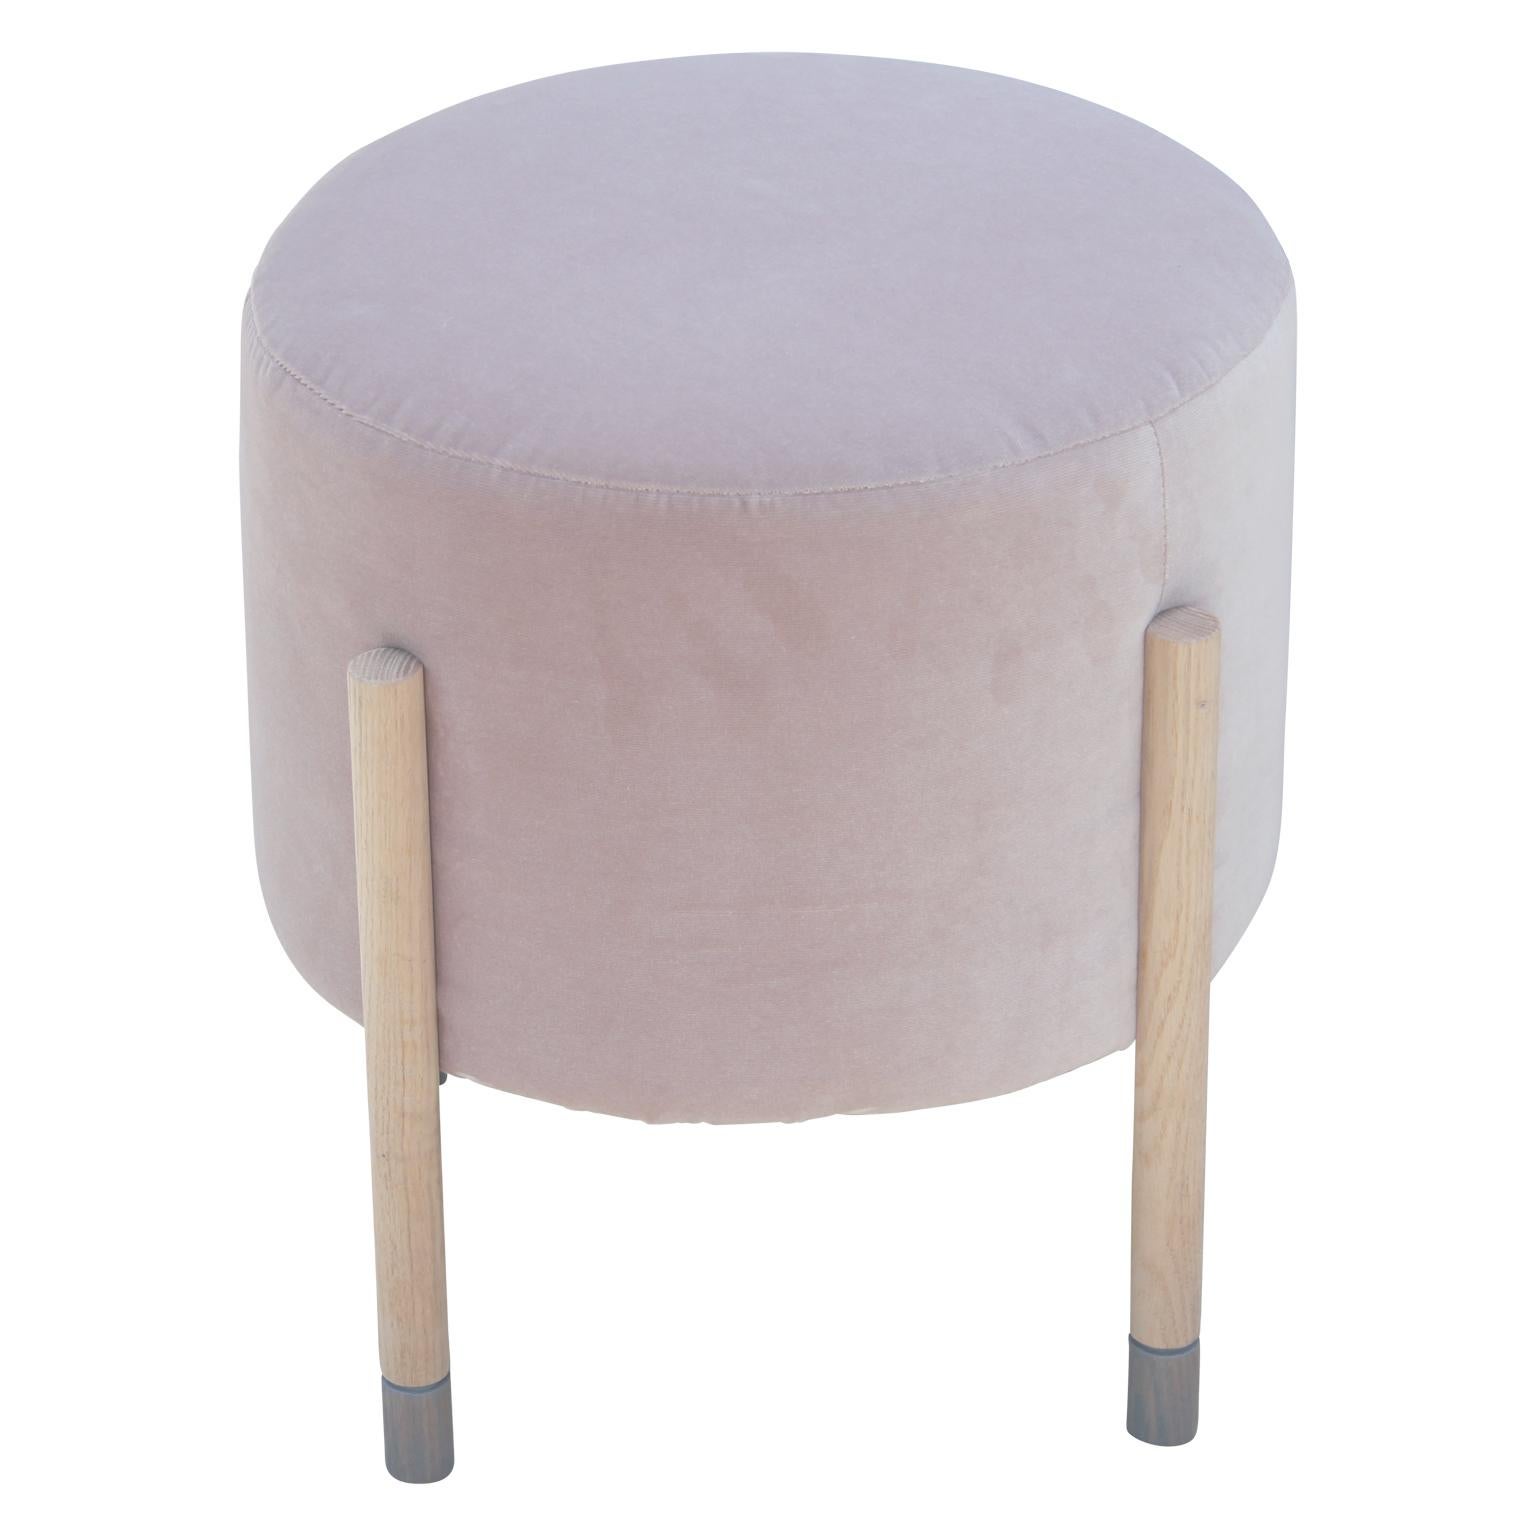 Pair of modern custom-made poufs / stools with bleached wood frames with grey tips and upholstered in a lush blush/purple velvet. Can make COM.